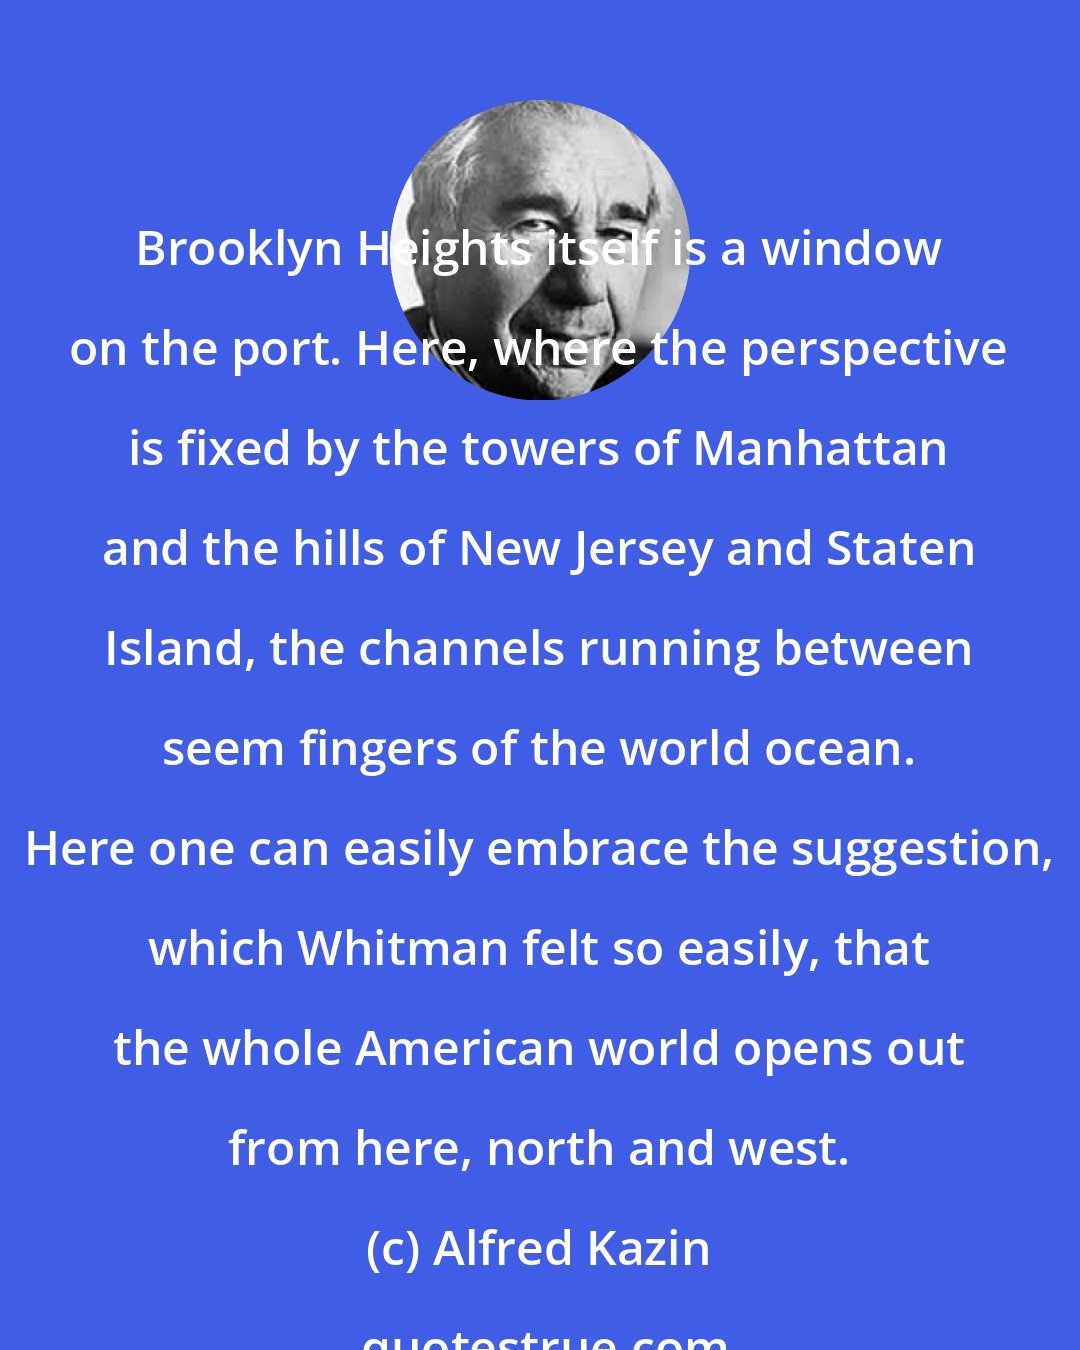 Alfred Kazin: Brooklyn Heights itself is a window on the port. Here, where the perspective is fixed by the towers of Manhattan and the hills of New Jersey and Staten Island, the channels running between seem fingers of the world ocean. Here one can easily embrace the suggestion, which Whitman felt so easily, that the whole American world opens out from here, north and west.